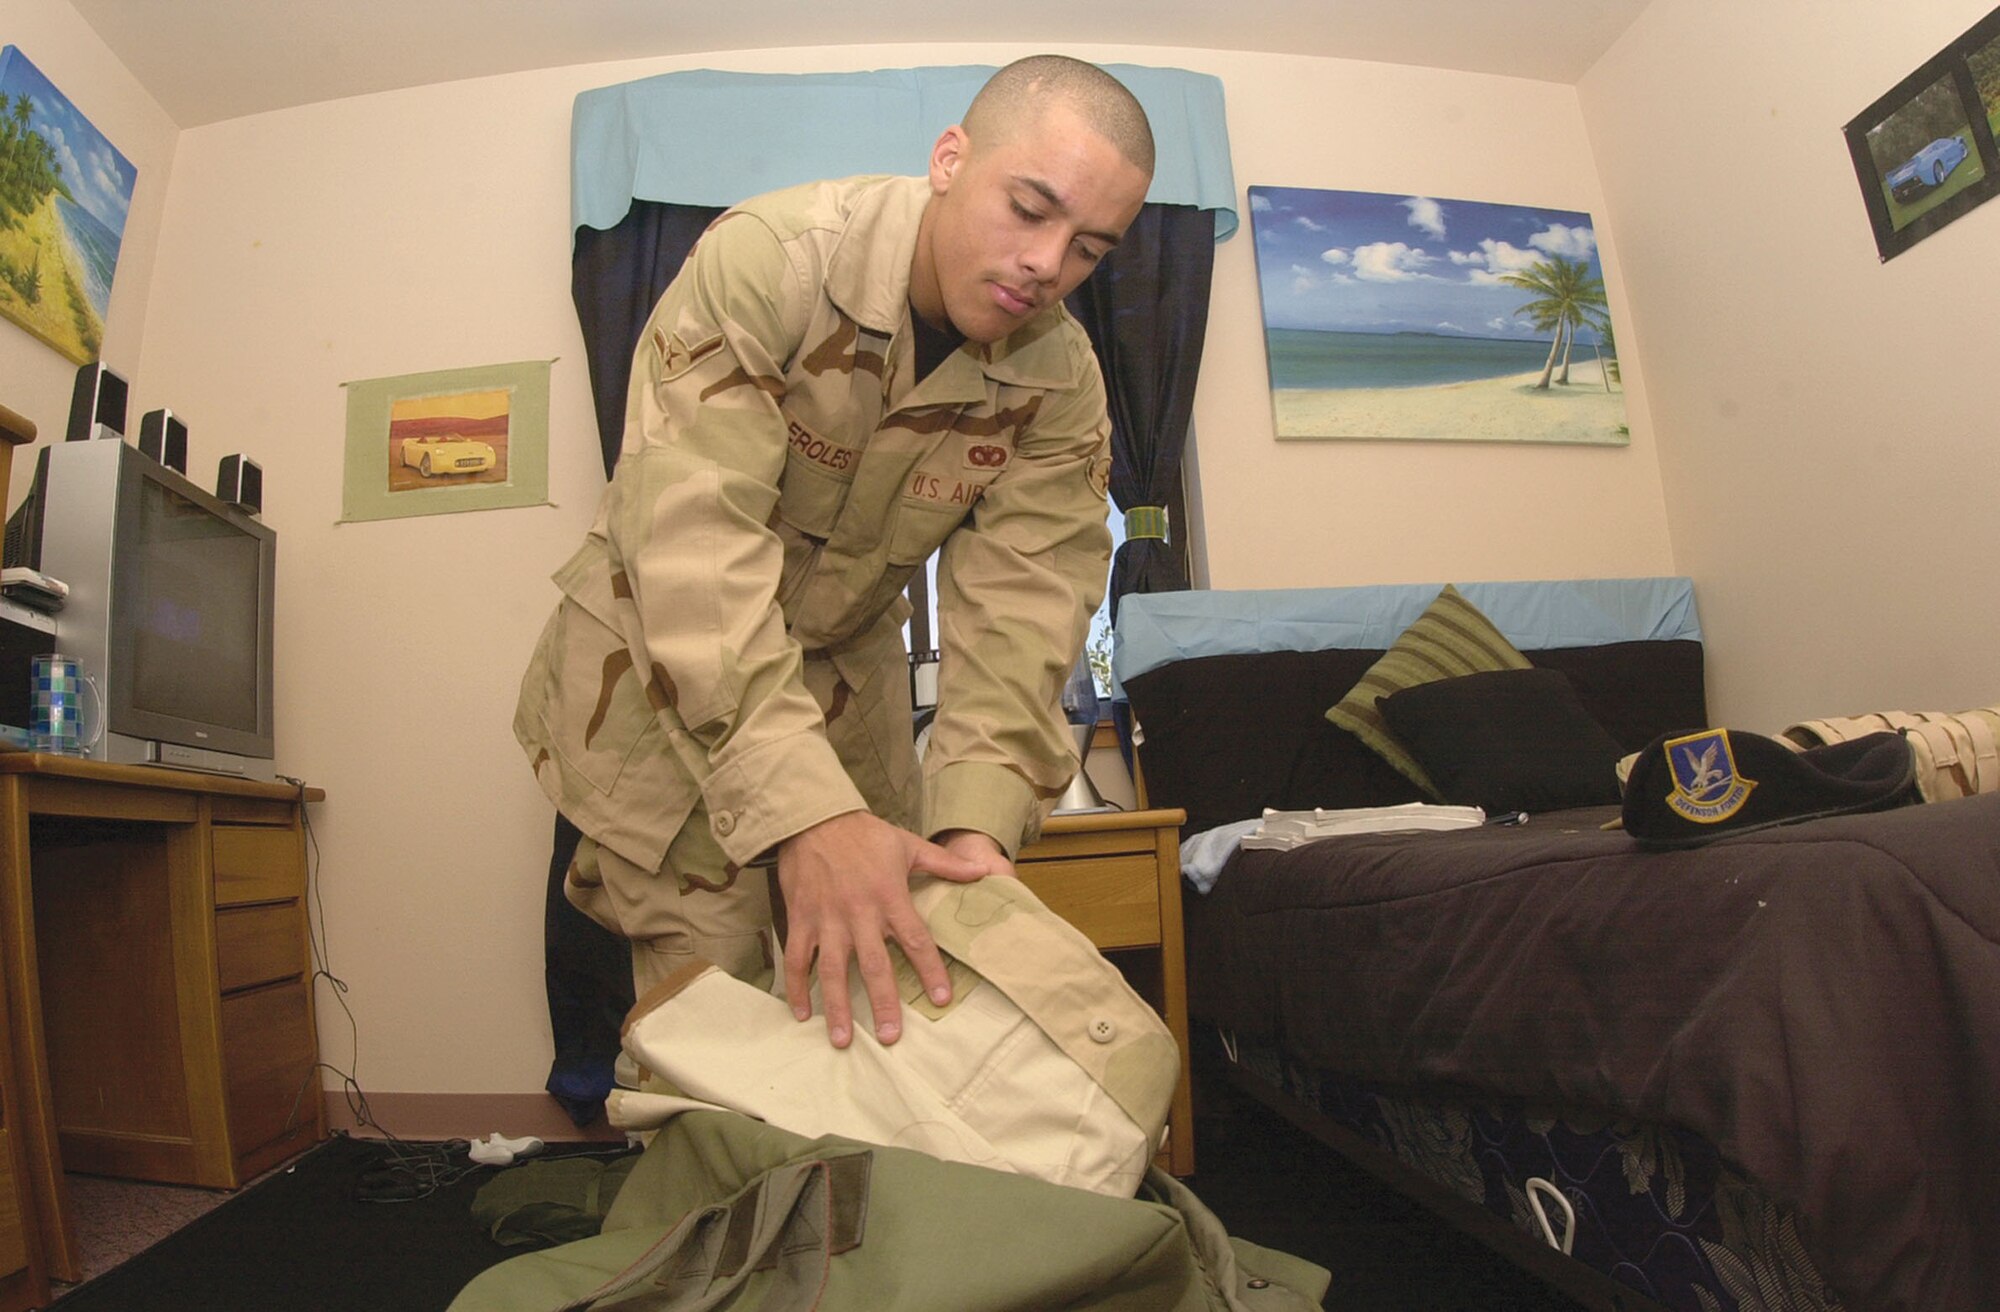 Airman Michael Eroles, a member of the 17th Security Forces Squadron, packs his duffle bag Wednesday inside his bedroom here. Airman Eroles is one of several servicemembers from Goodfellow scheduled to deploy this month.  	

“I’m very excited about getting deployed,  I look forward at the opportunity to learn about other cultures,” Airman Eroles said. “I think this deployment will be a great learning experience.  I know I will miss many things and many people while I’m gone, but I know I’m simply fulfilling part of my commitment to serve my country,” he added. (U.S Air Force photo by Airman 1st Class Luis Loza Gutierrez.)
